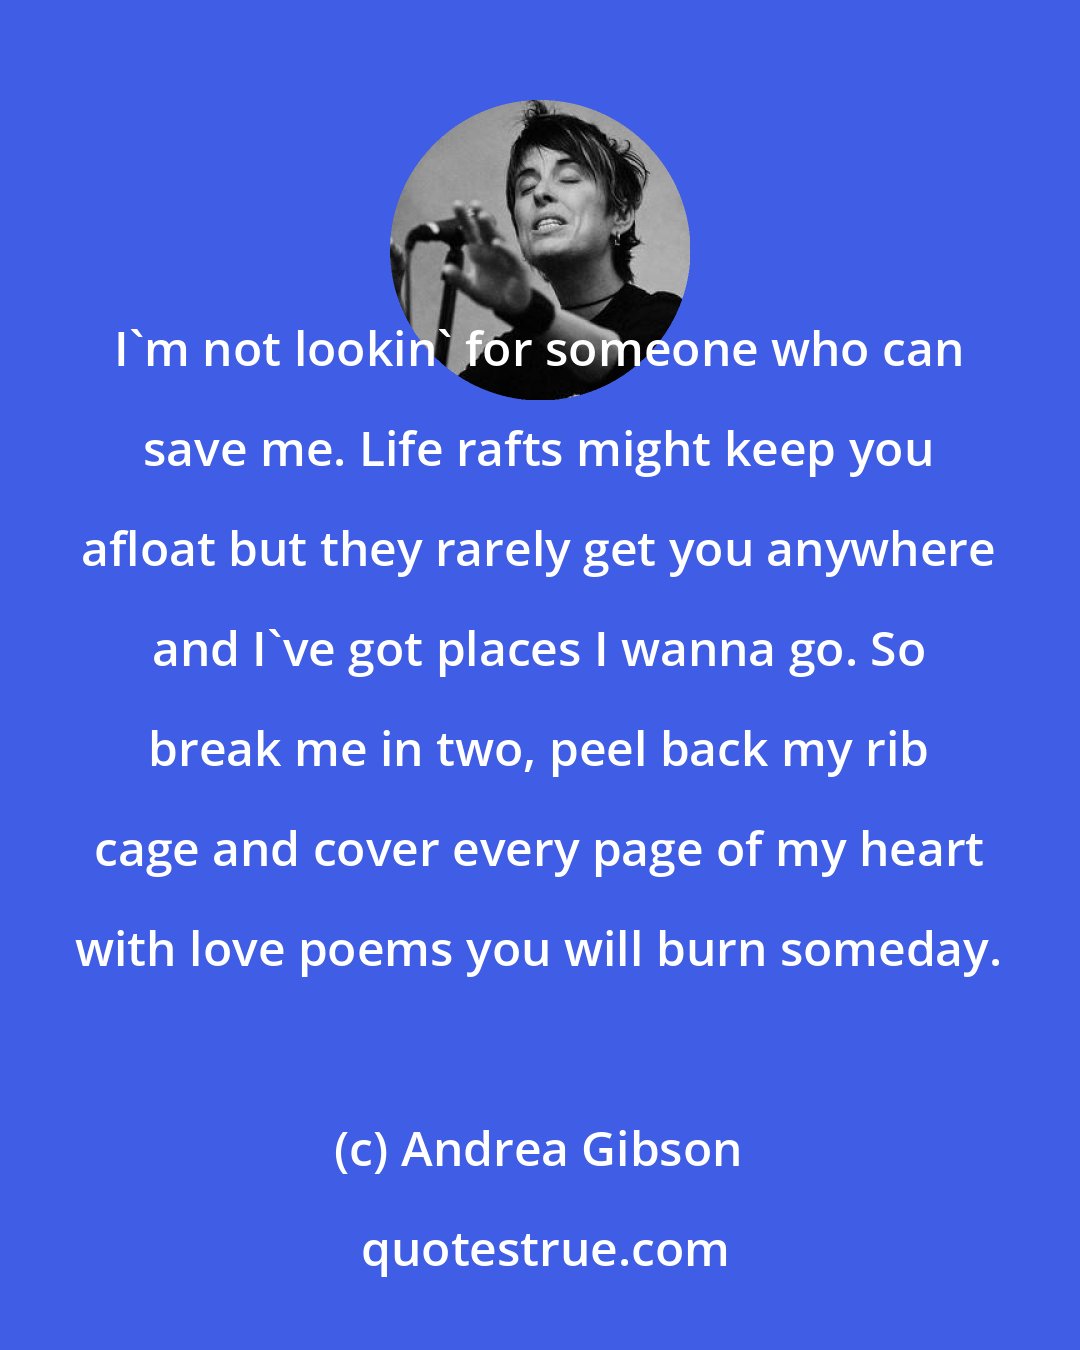 Andrea Gibson: I'm not lookin' for someone who can save me. Life rafts might keep you afloat but they rarely get you anywhere and I've got places I wanna go. So break me in two, peel back my rib cage and cover every page of my heart with love poems you will burn someday.